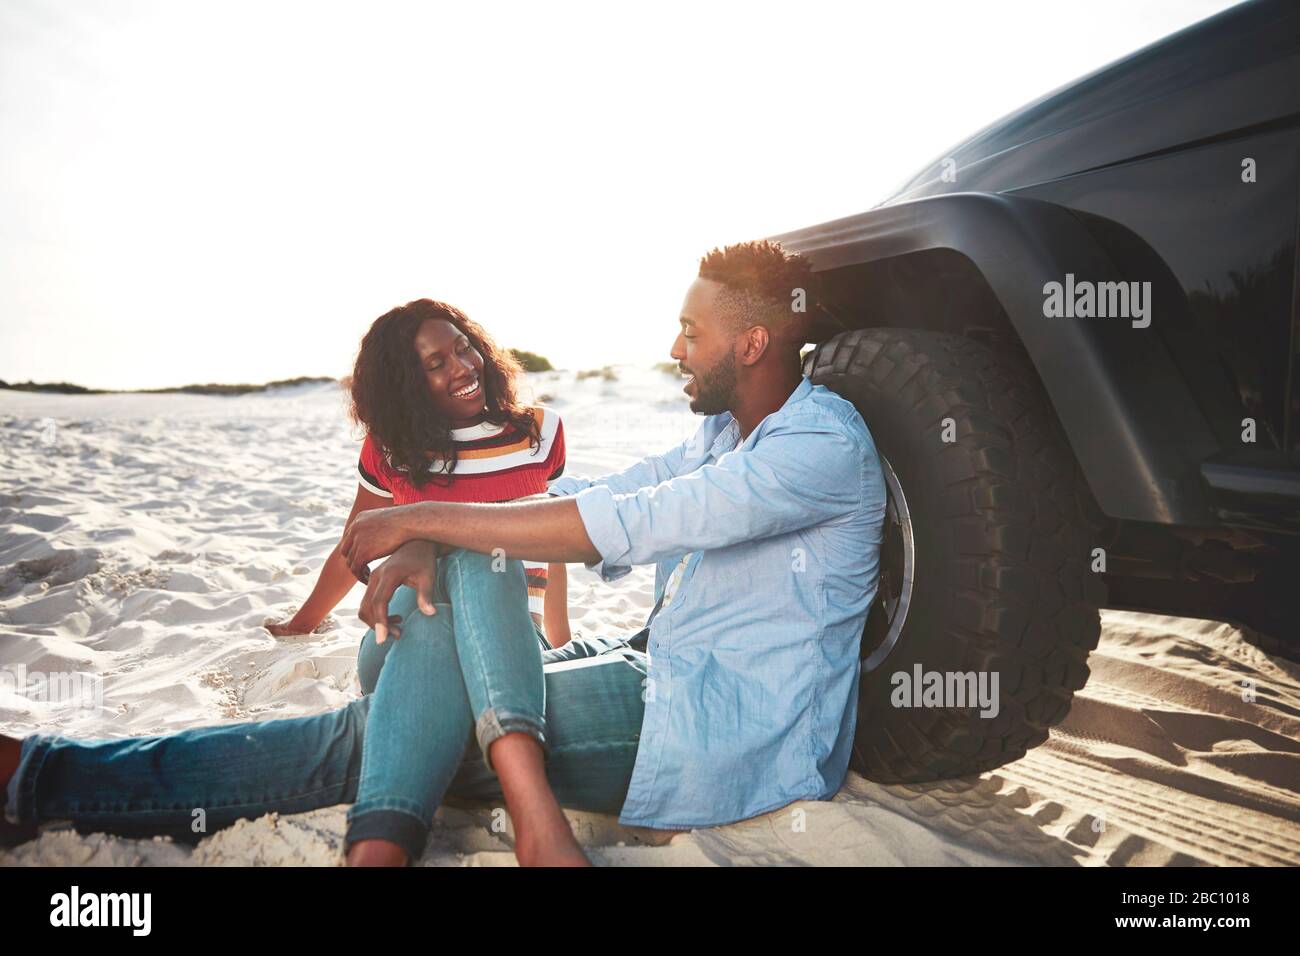 Young couple relaxing, hanging out on beach Stock Photo